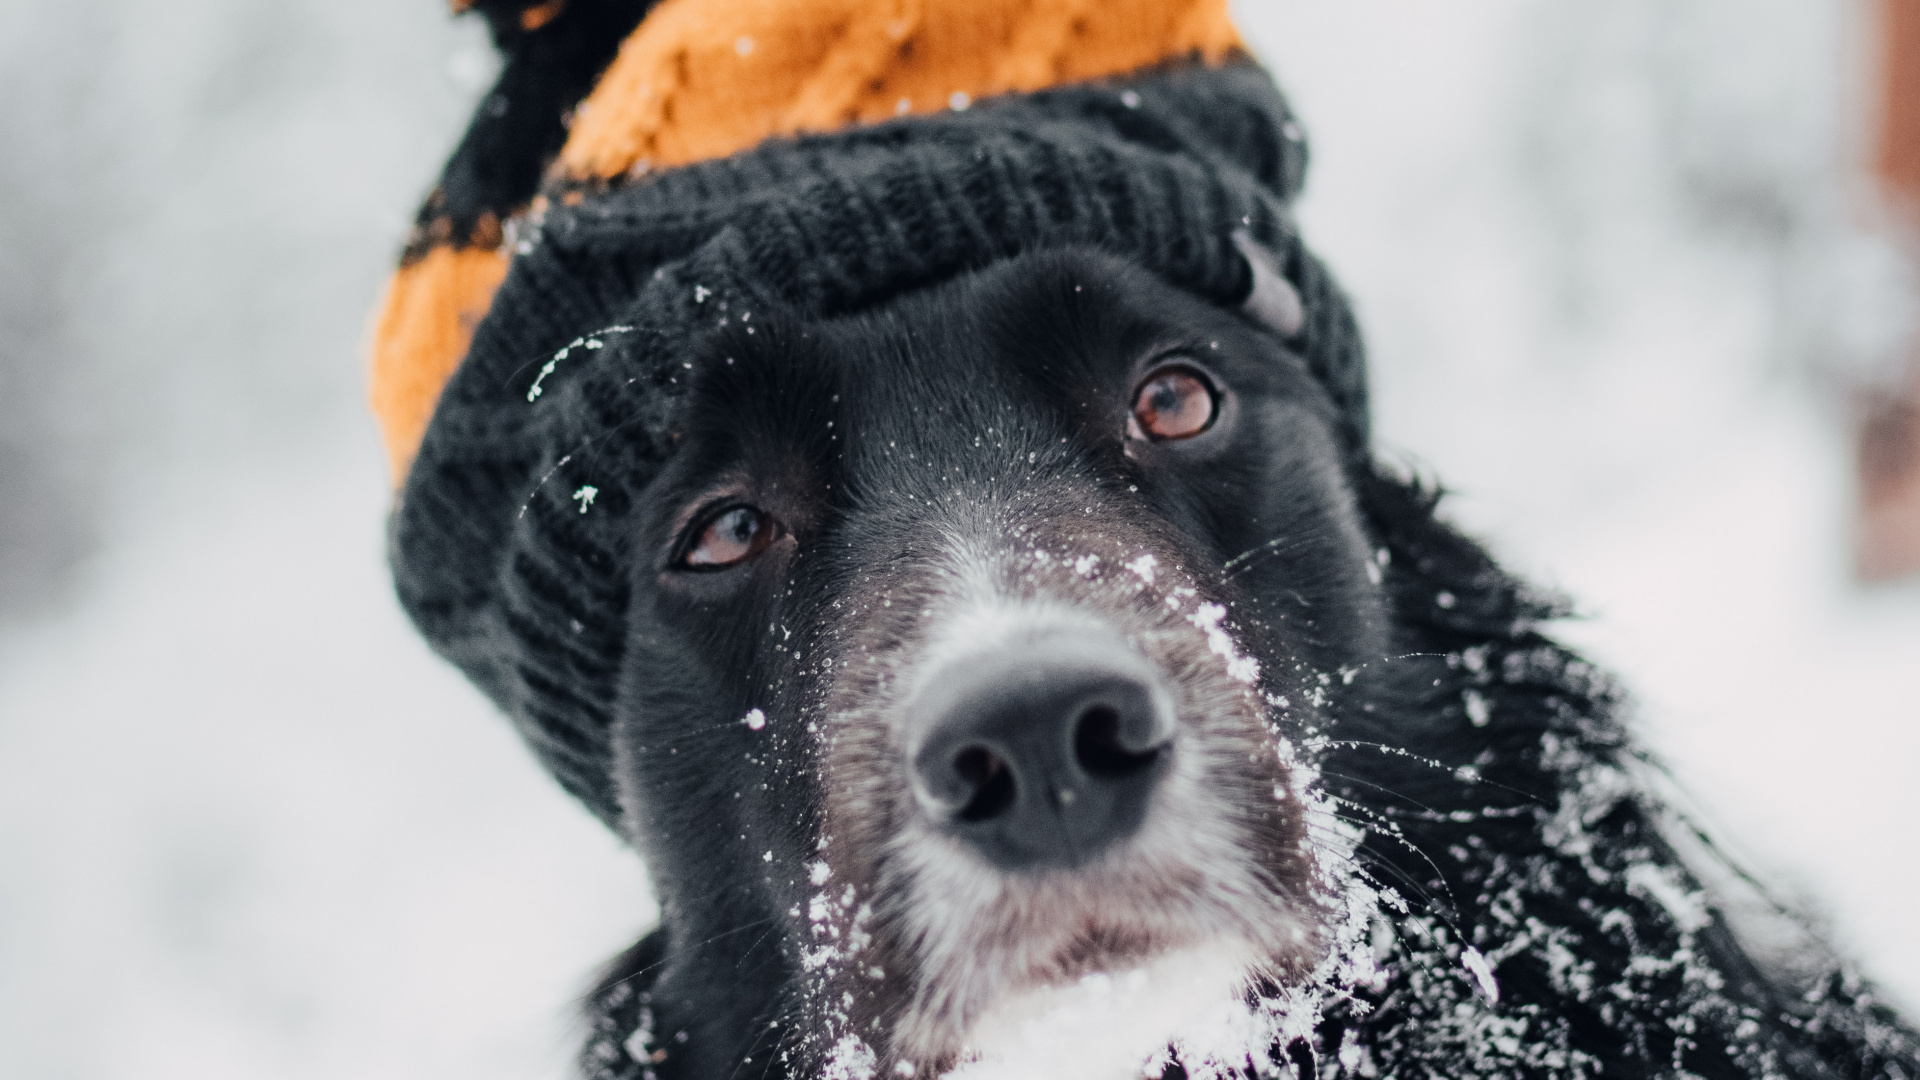 Black and White Border Collie Wearing Orange Knit Cap and Orange Knit Cap. Wallpaper in 1920x1080 Resolution